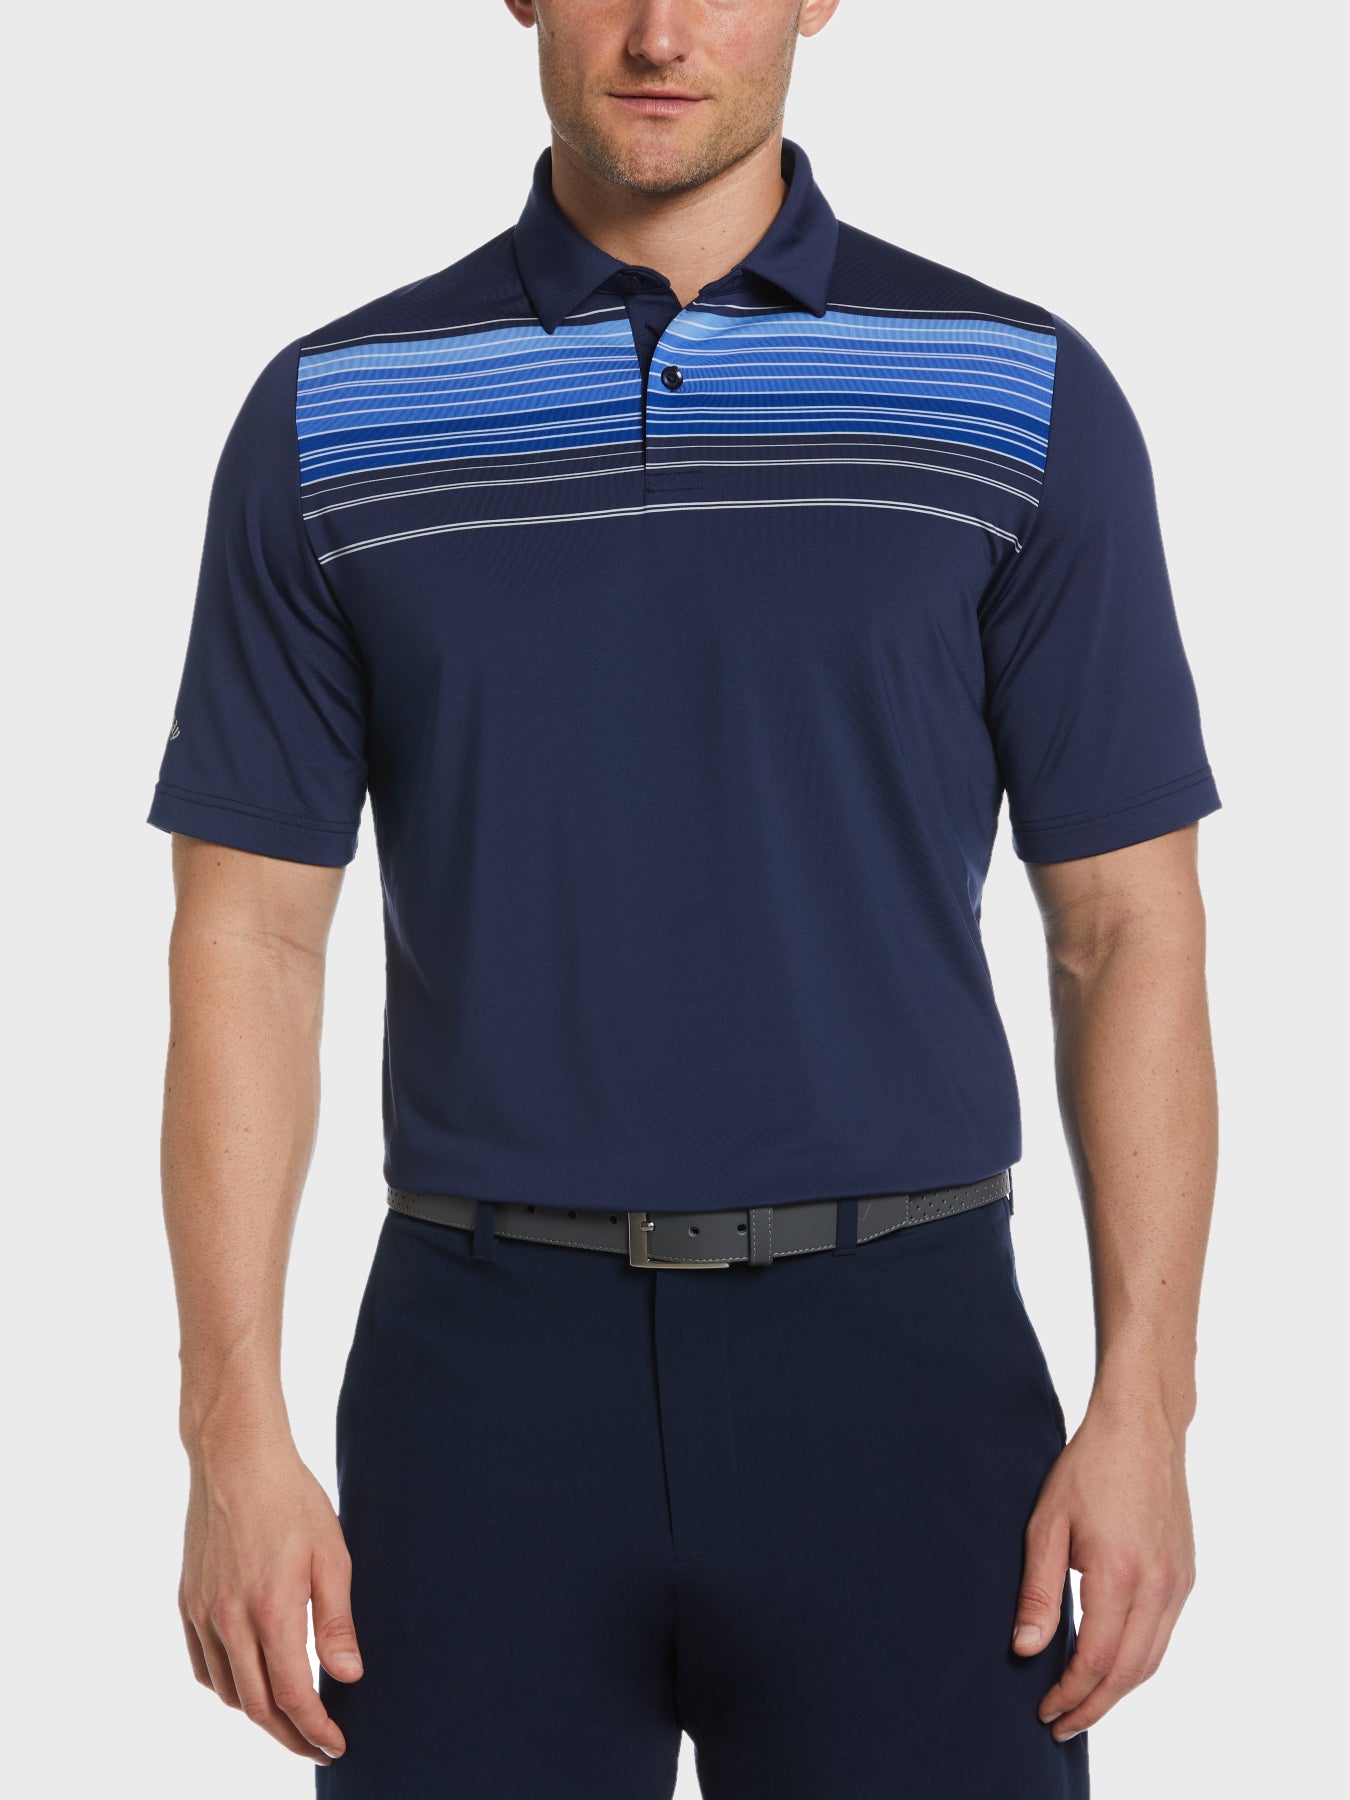 View Energized Stripe Polo In Peacoat information